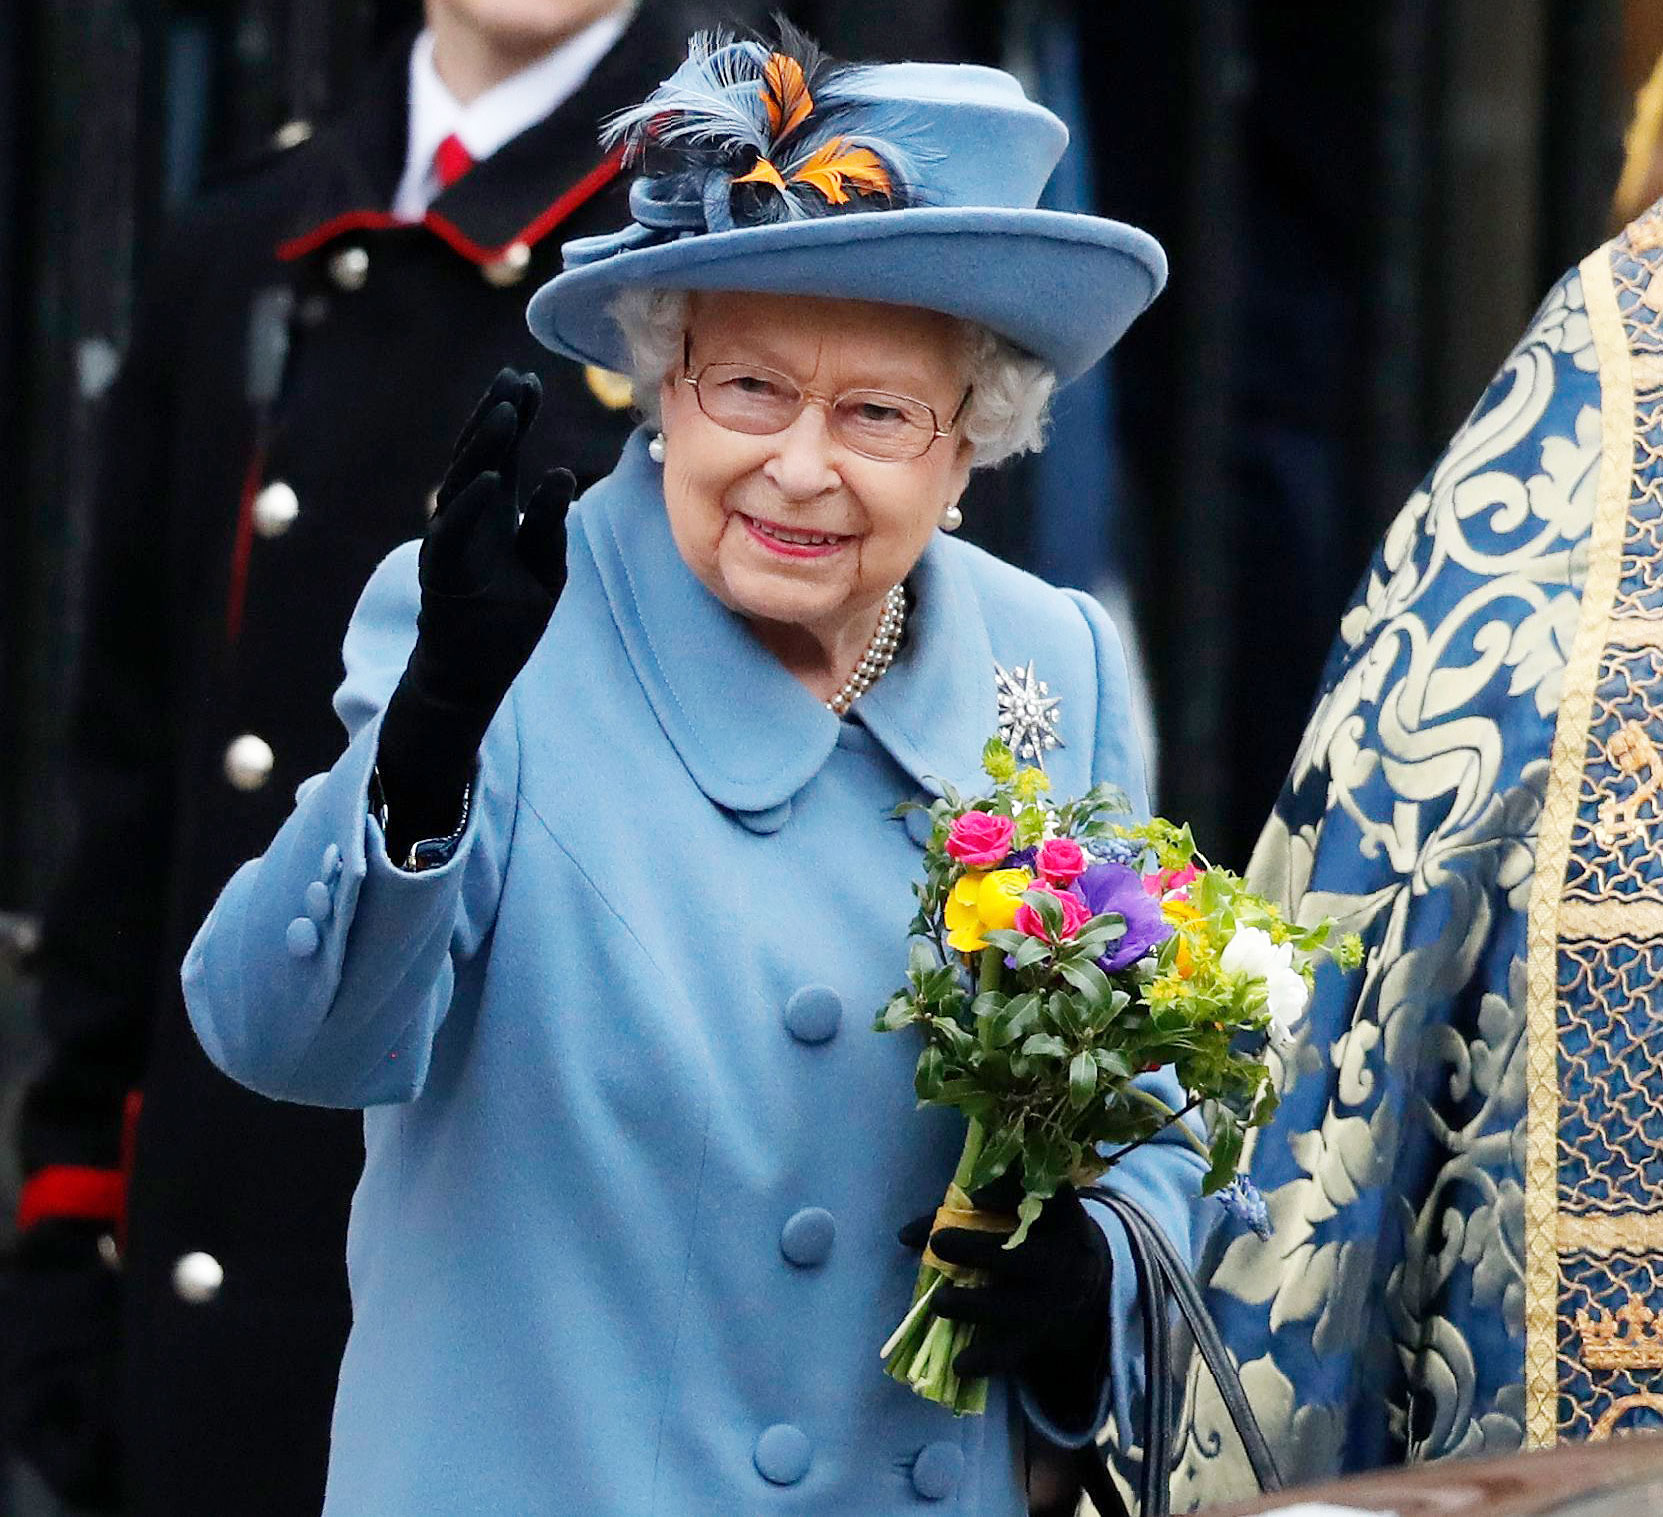 Queen Elizabeth To Honor Birthday With Small Trooping The Colour Parade